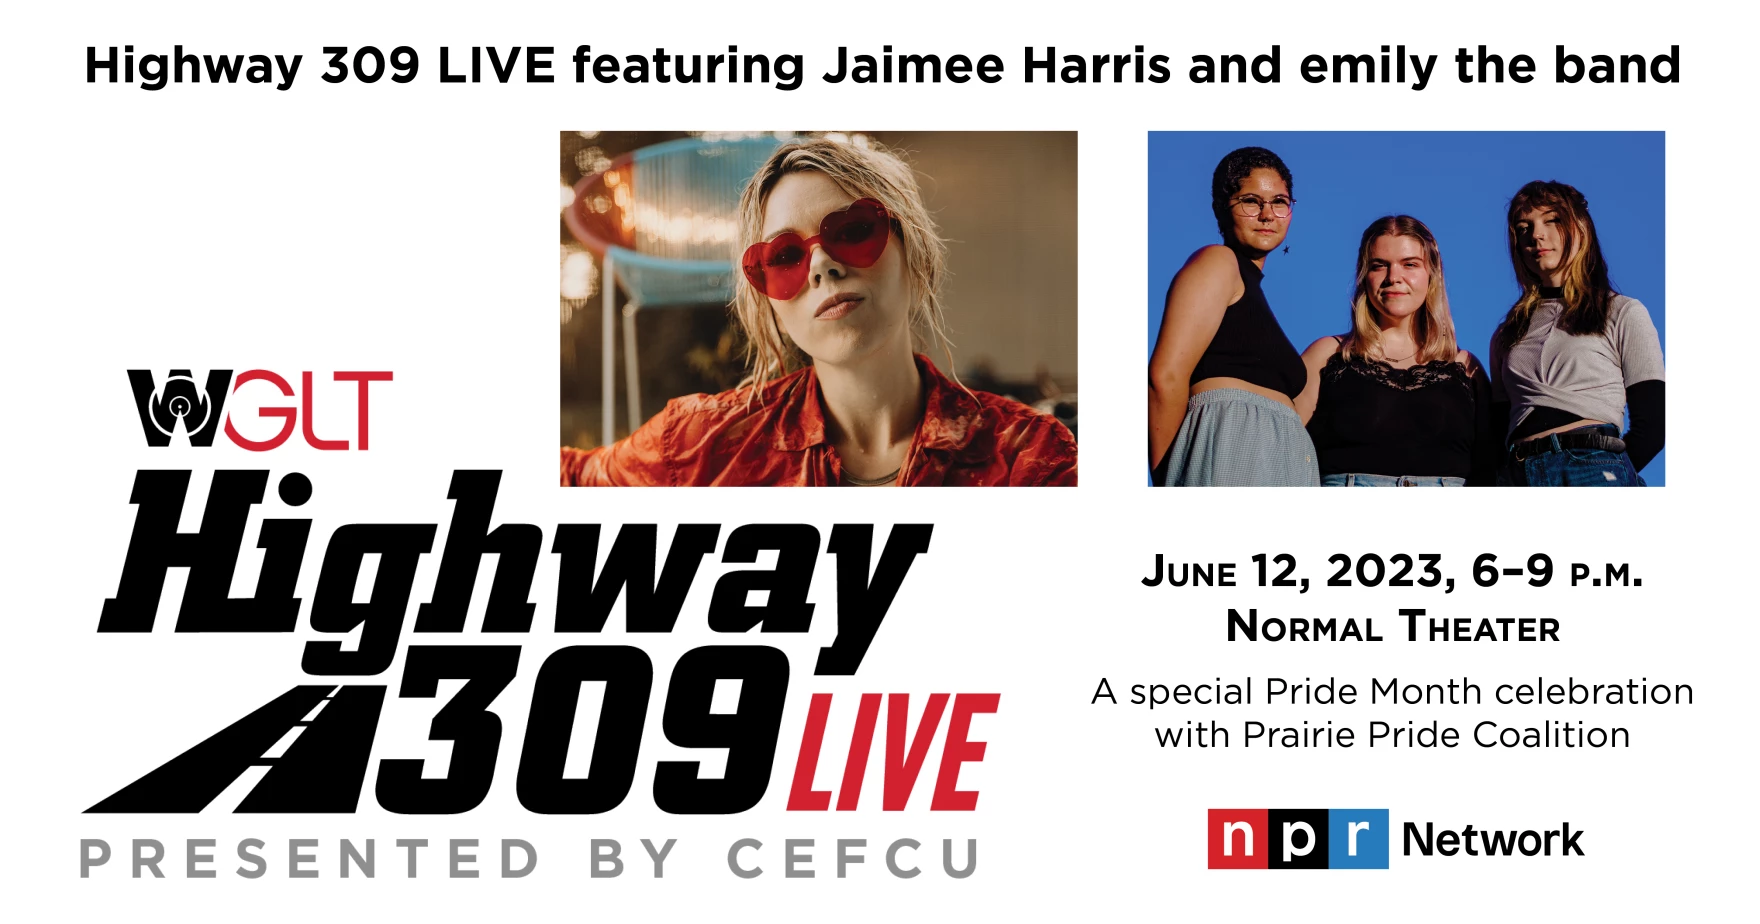 Highway 309 LIVE featuring Jaimee Harris and Emily the Band